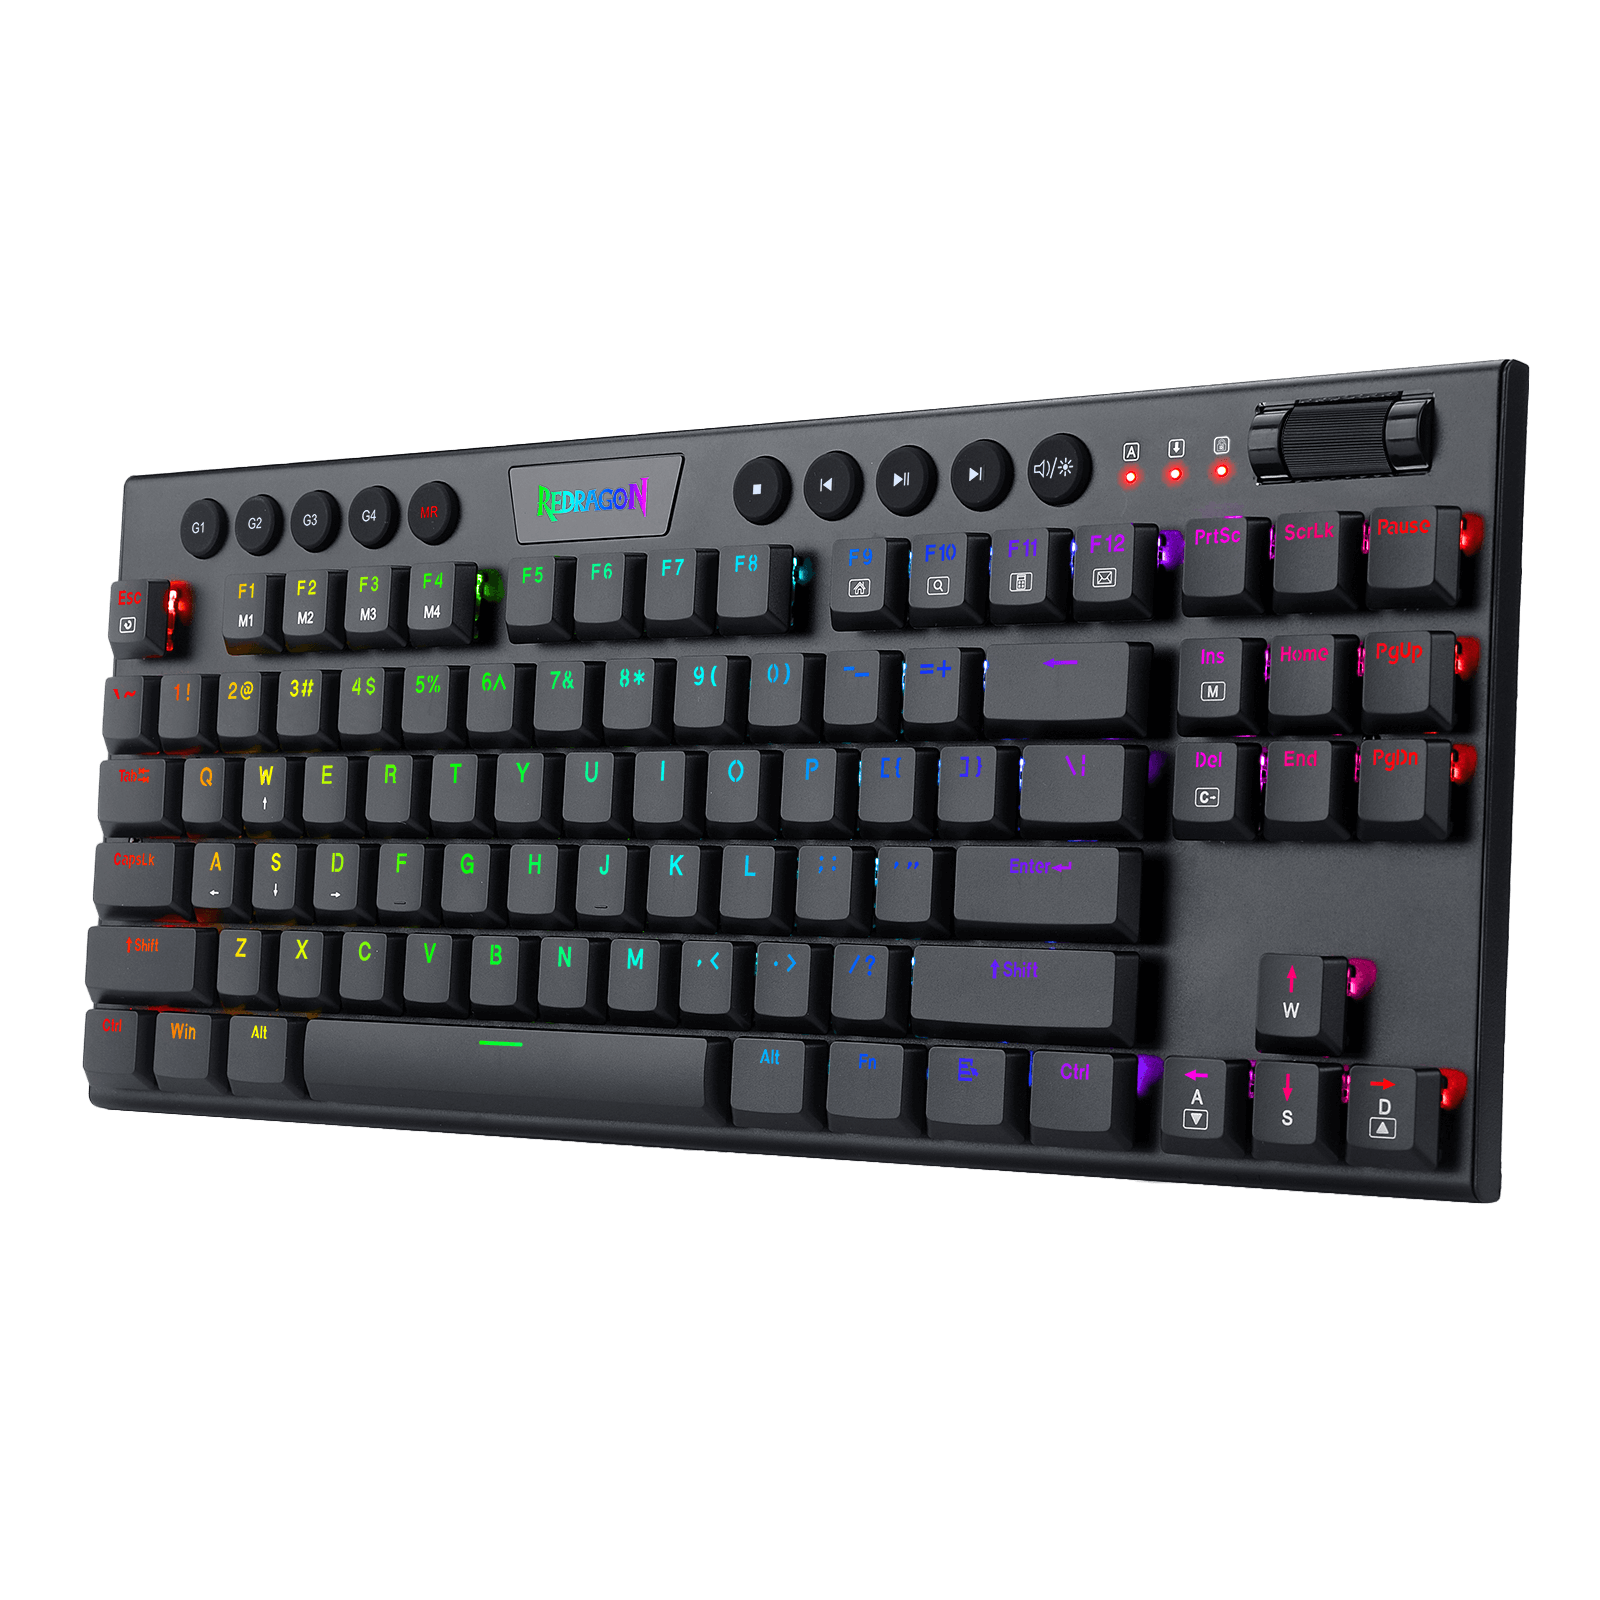 The 4 Best Budget Gaming Keyboards - Winter 2024: Reviews 